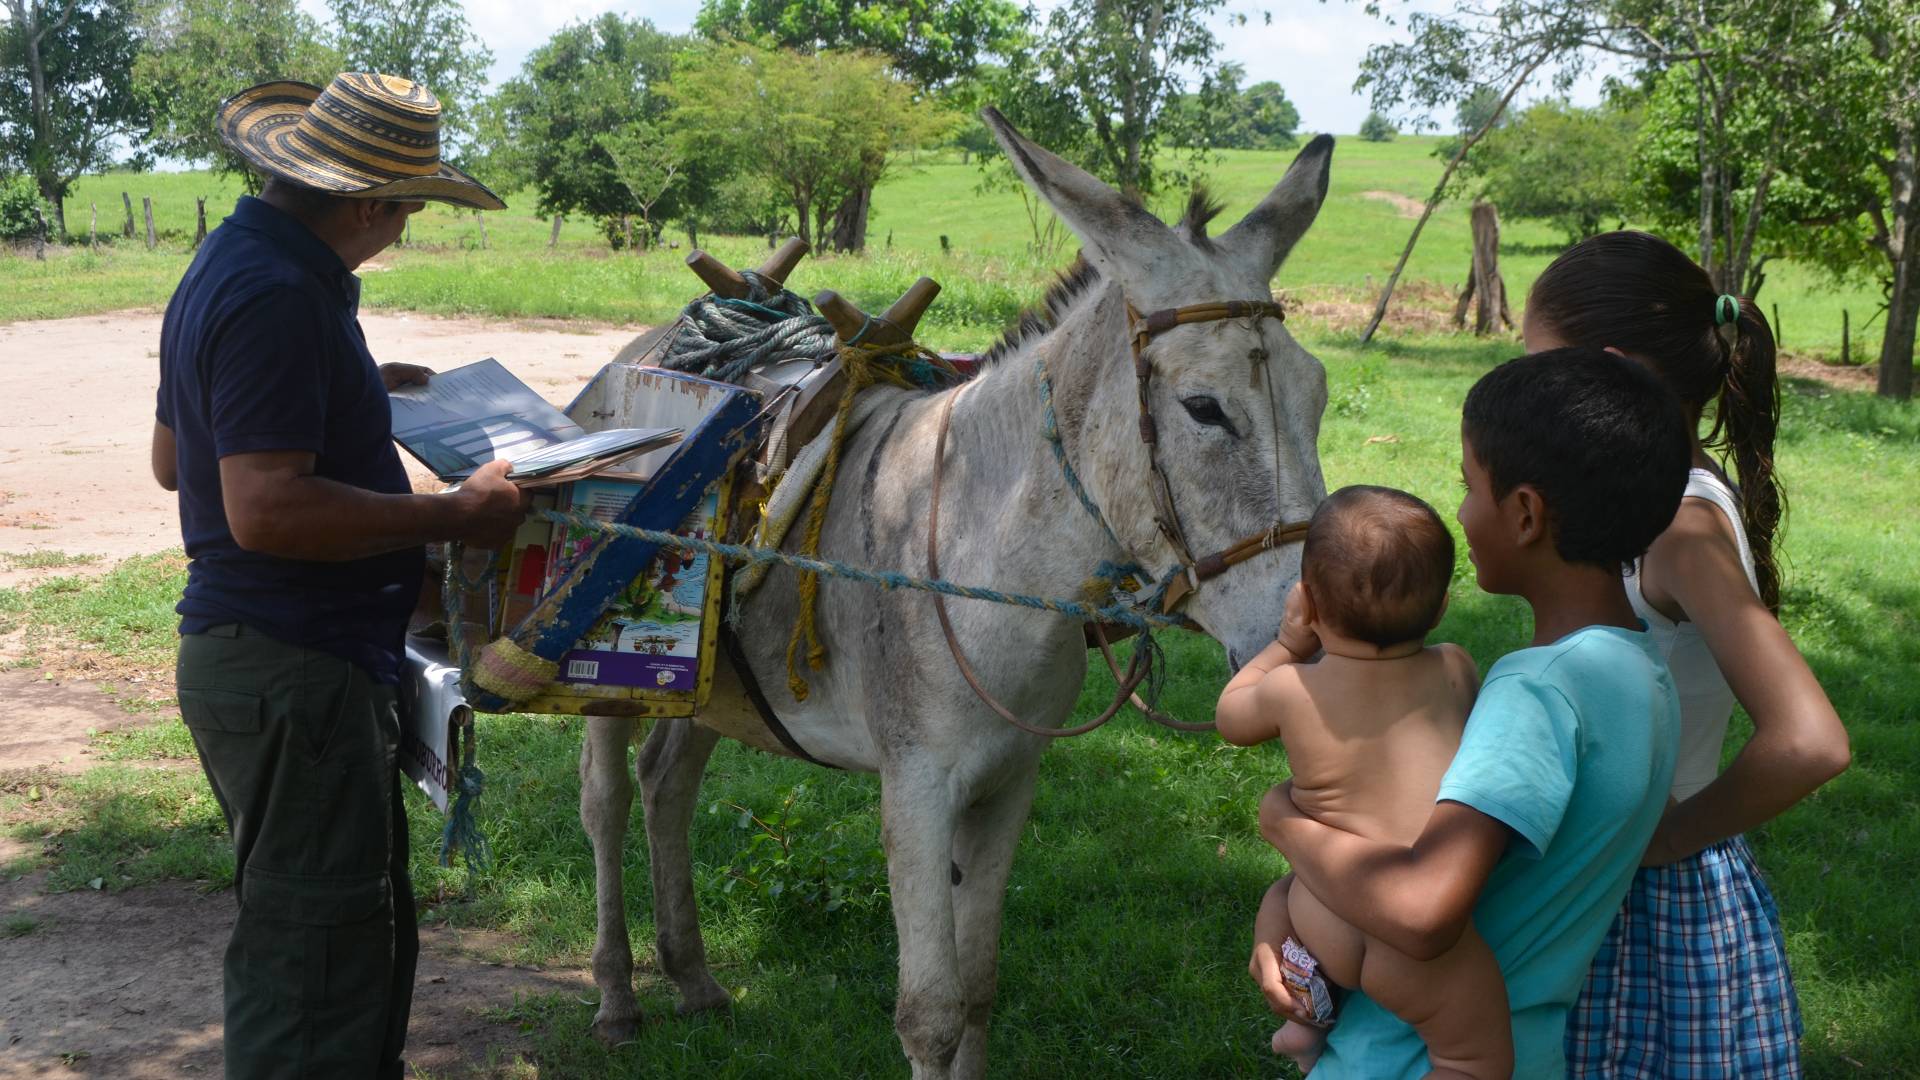 Man reading book in front of burro and three children